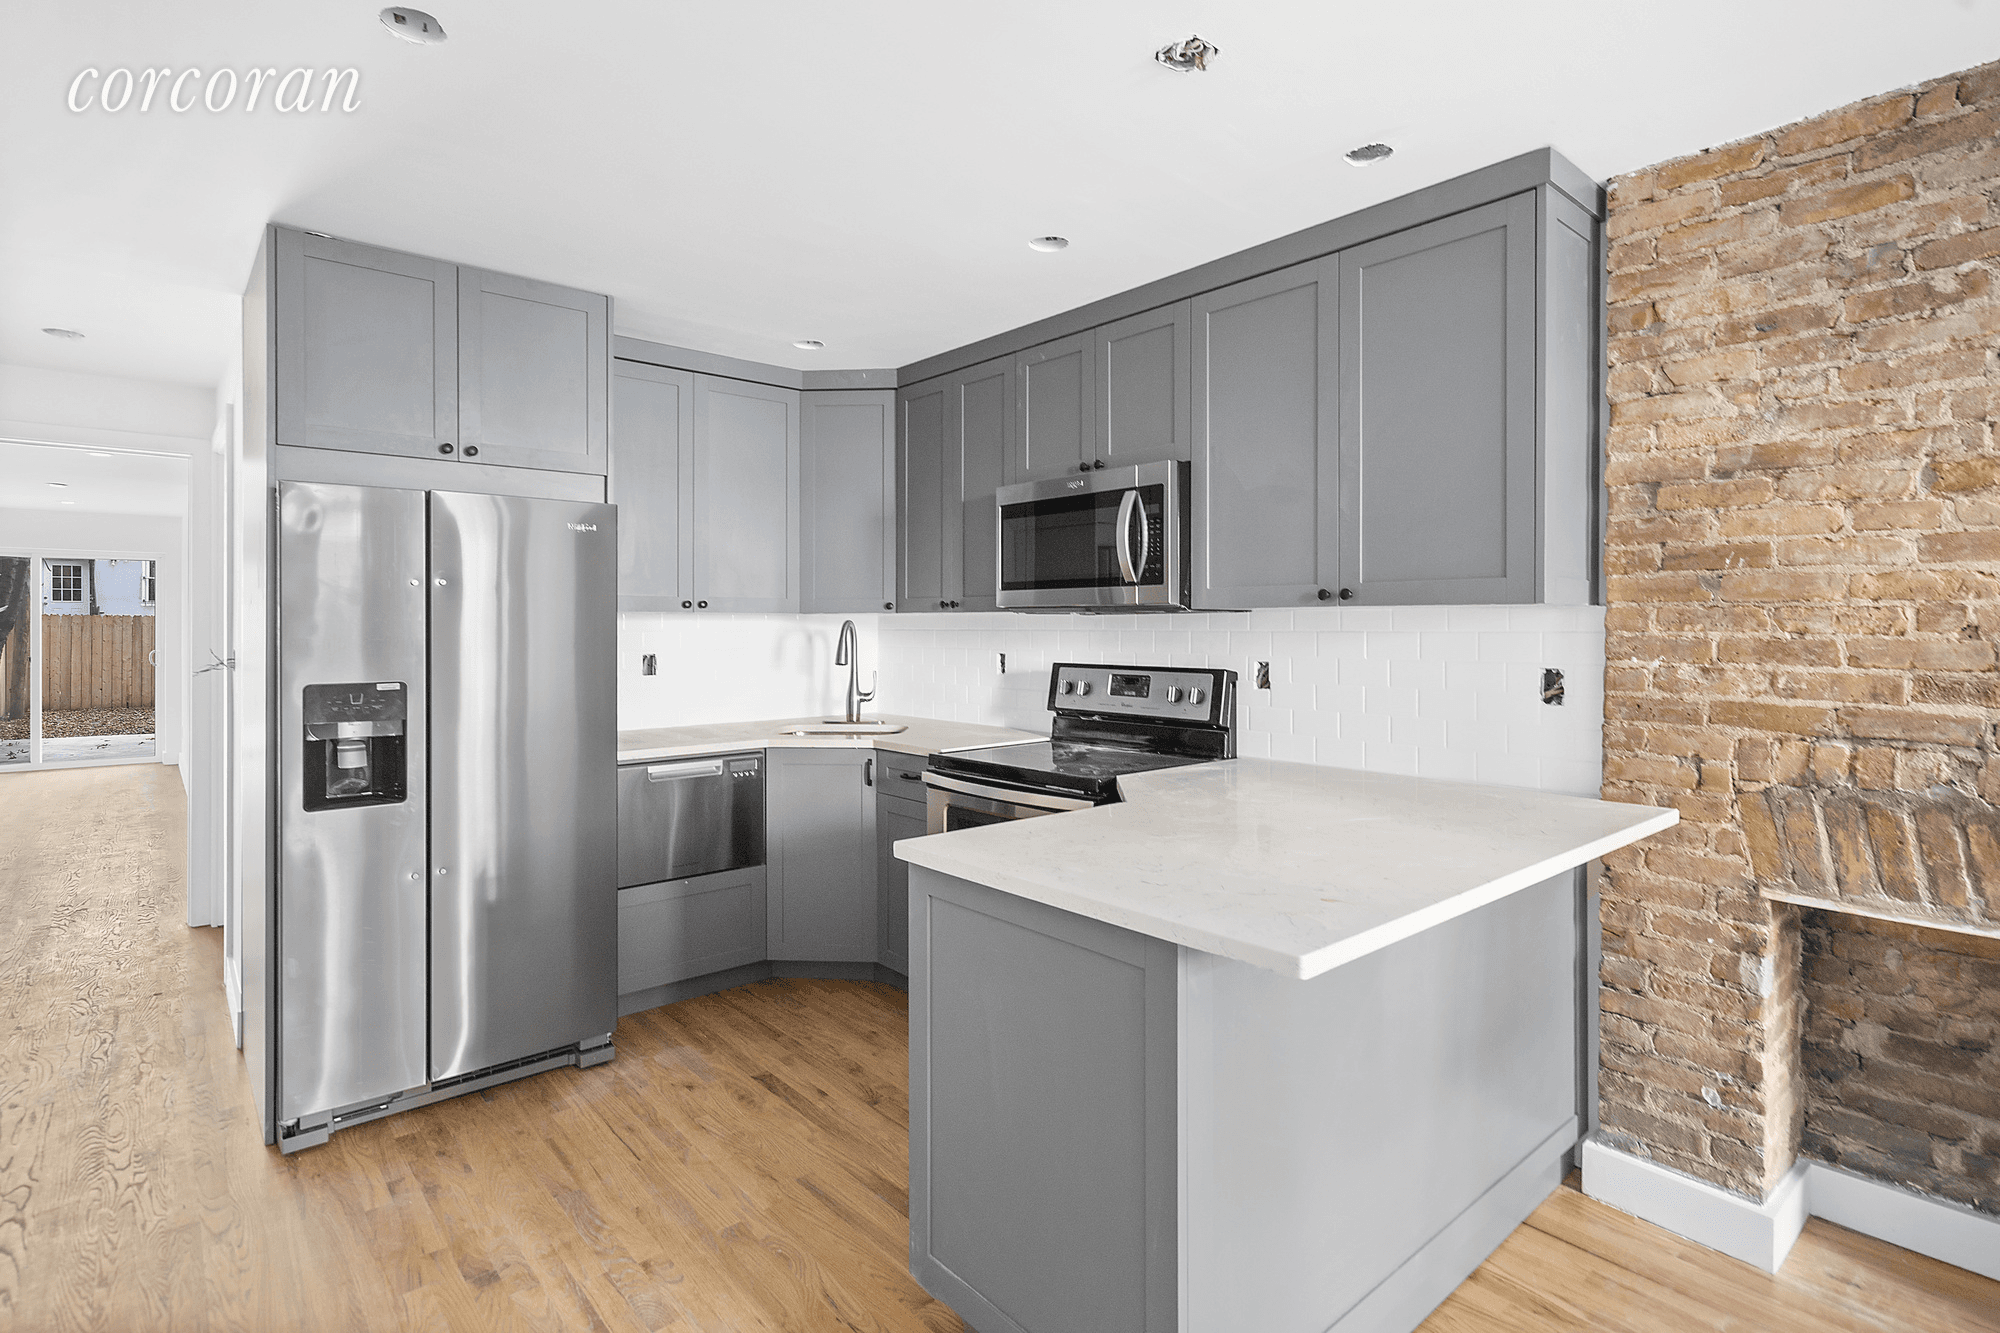 Introducing 742A Lafayette Avenue, this beautifully gut renovated 1 bedroom garden apartment is not to be missed.